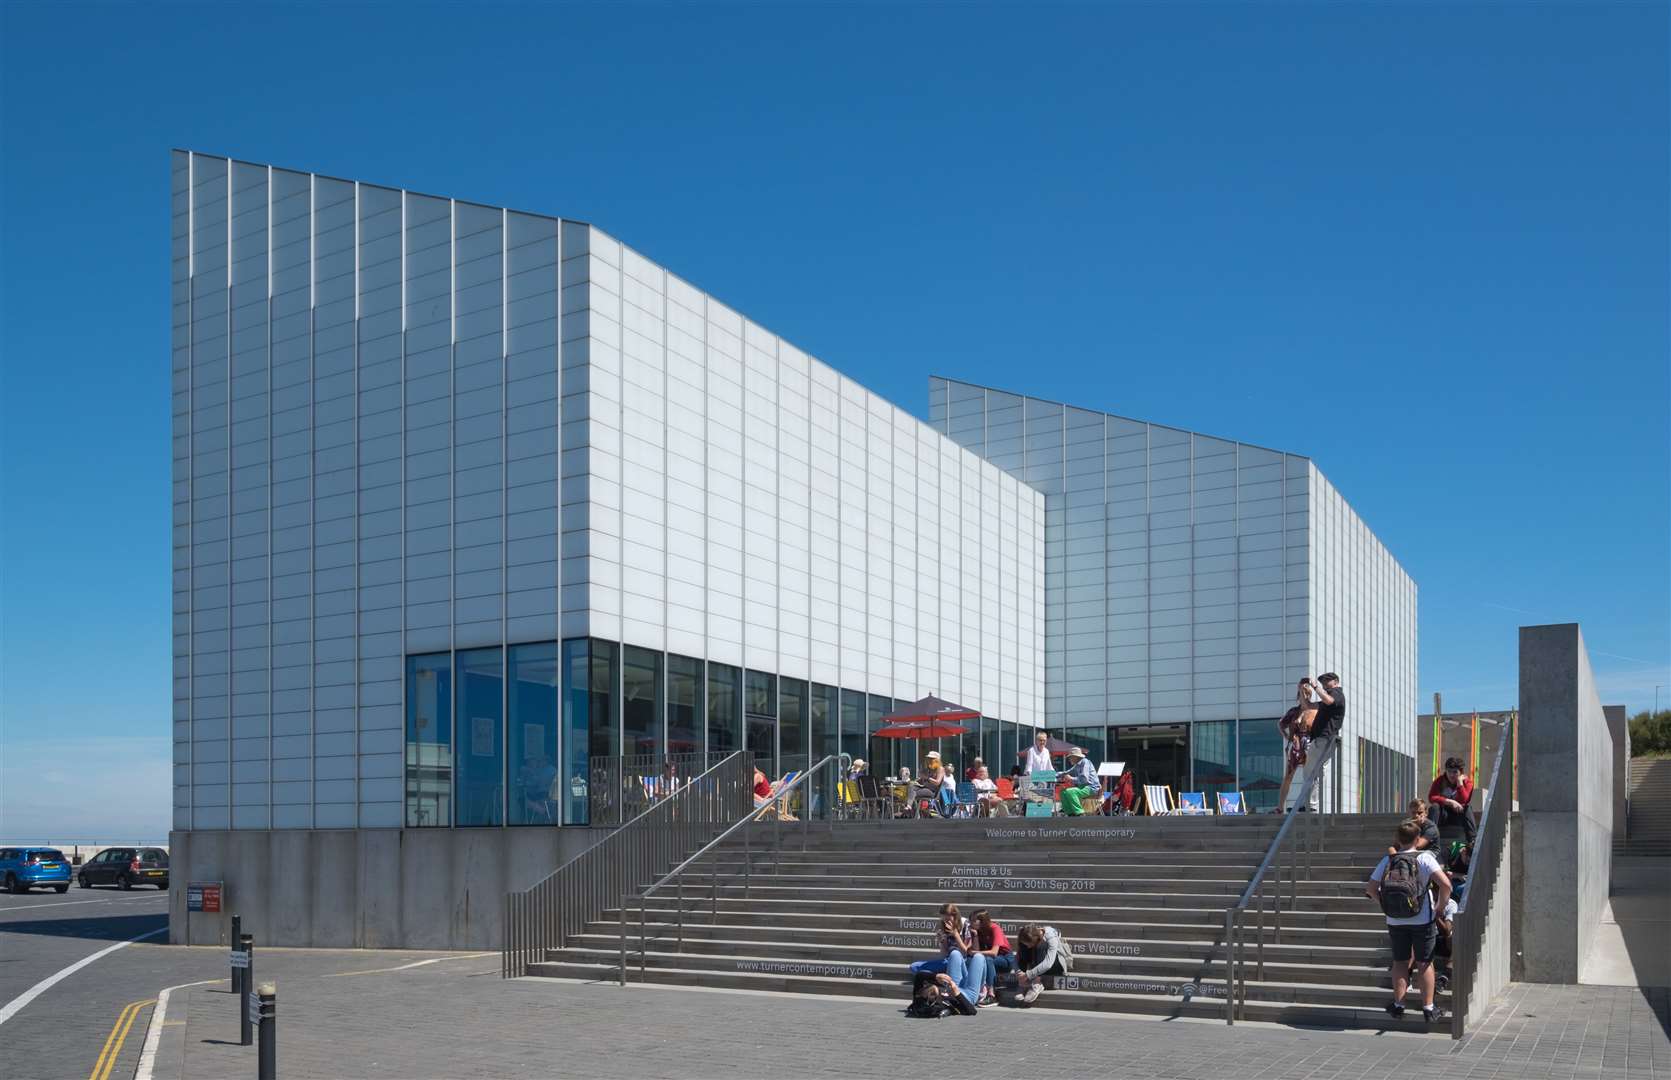 Turner Contemporary in Margate opened its doors 10 years ago